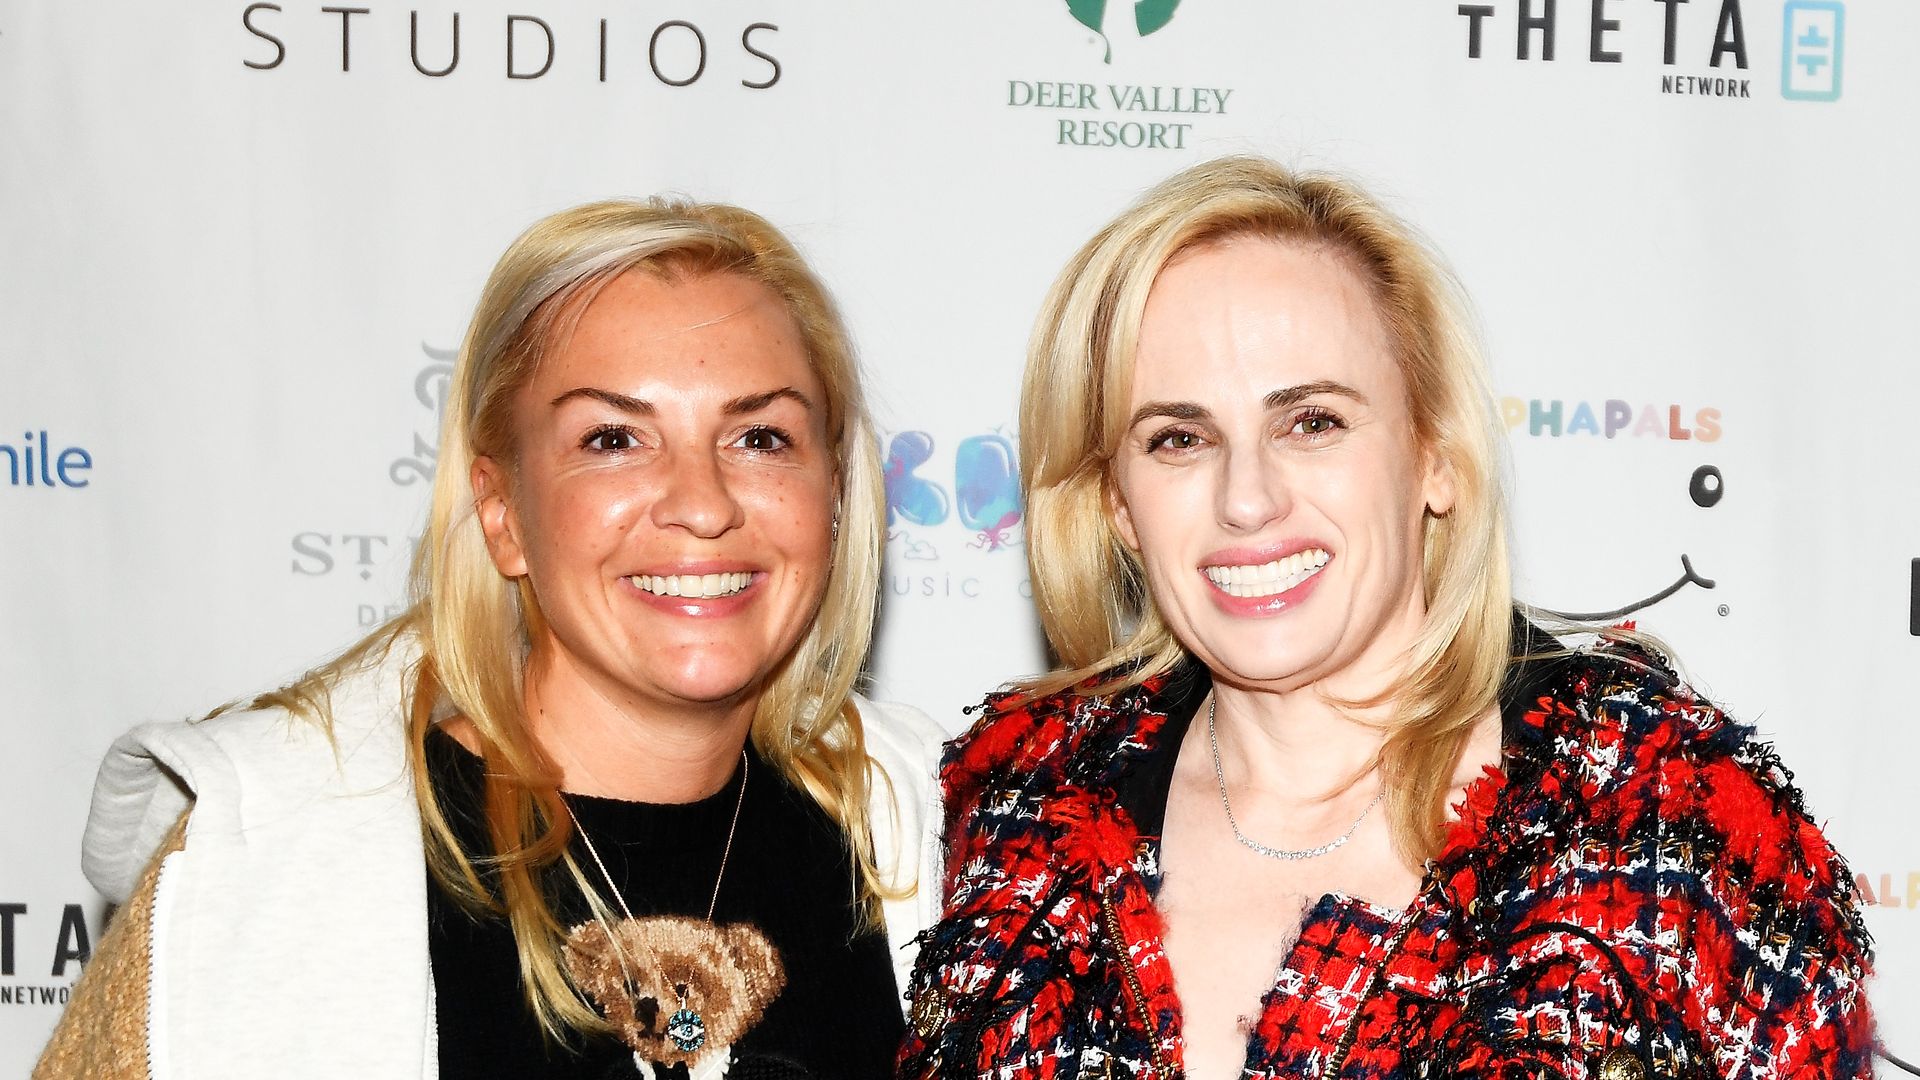 Rebel Wilson: inside star's relationship with fiancée Ramona Agruma: co-parenting, fall outs and more